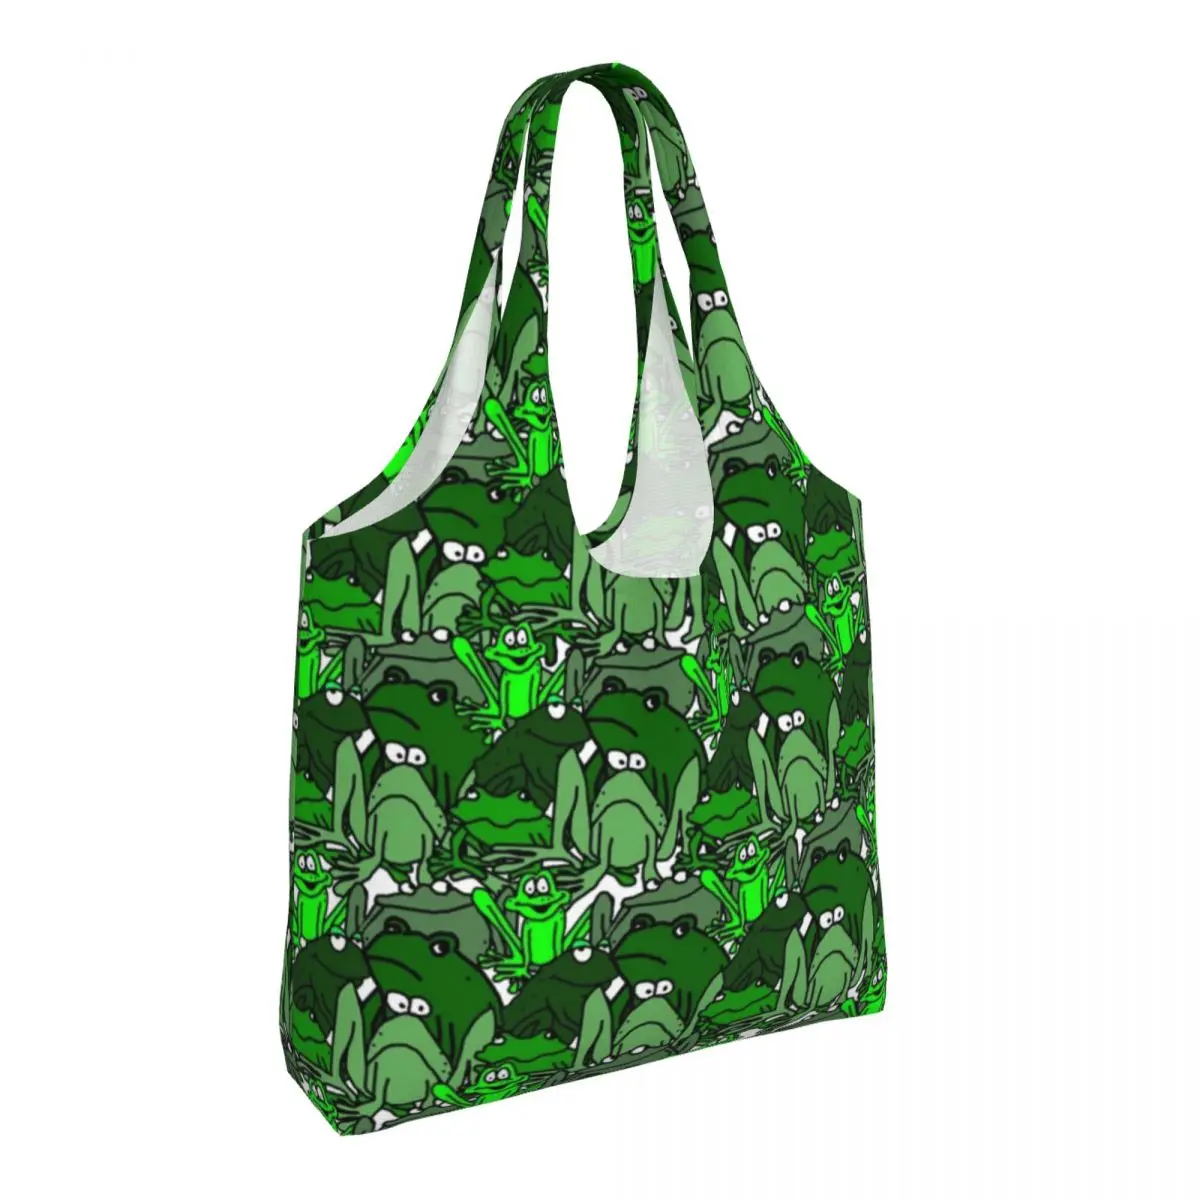 

Frog Cartoon Shopping Bag Funny Many Frogs Green Pattern School Woman Handbag Gifts Reusable Polyester Bags